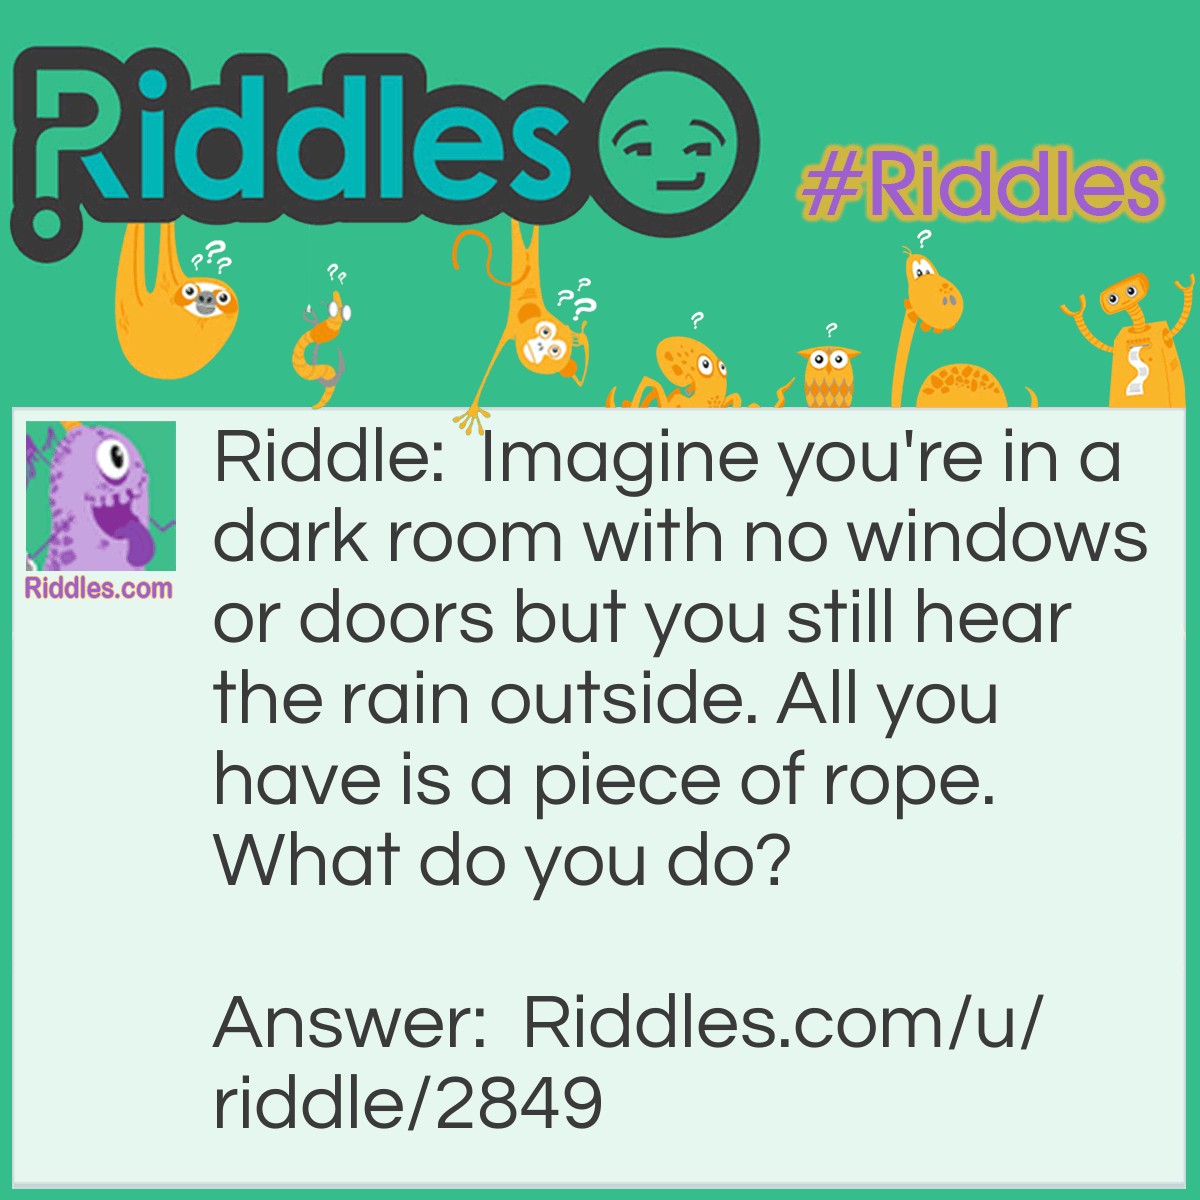 Riddle: Imagine you're in a dark room with no windows or doors but you still hear the rain outside. All you have is a piece of rope. What do you do? Answer: Stop imagining.